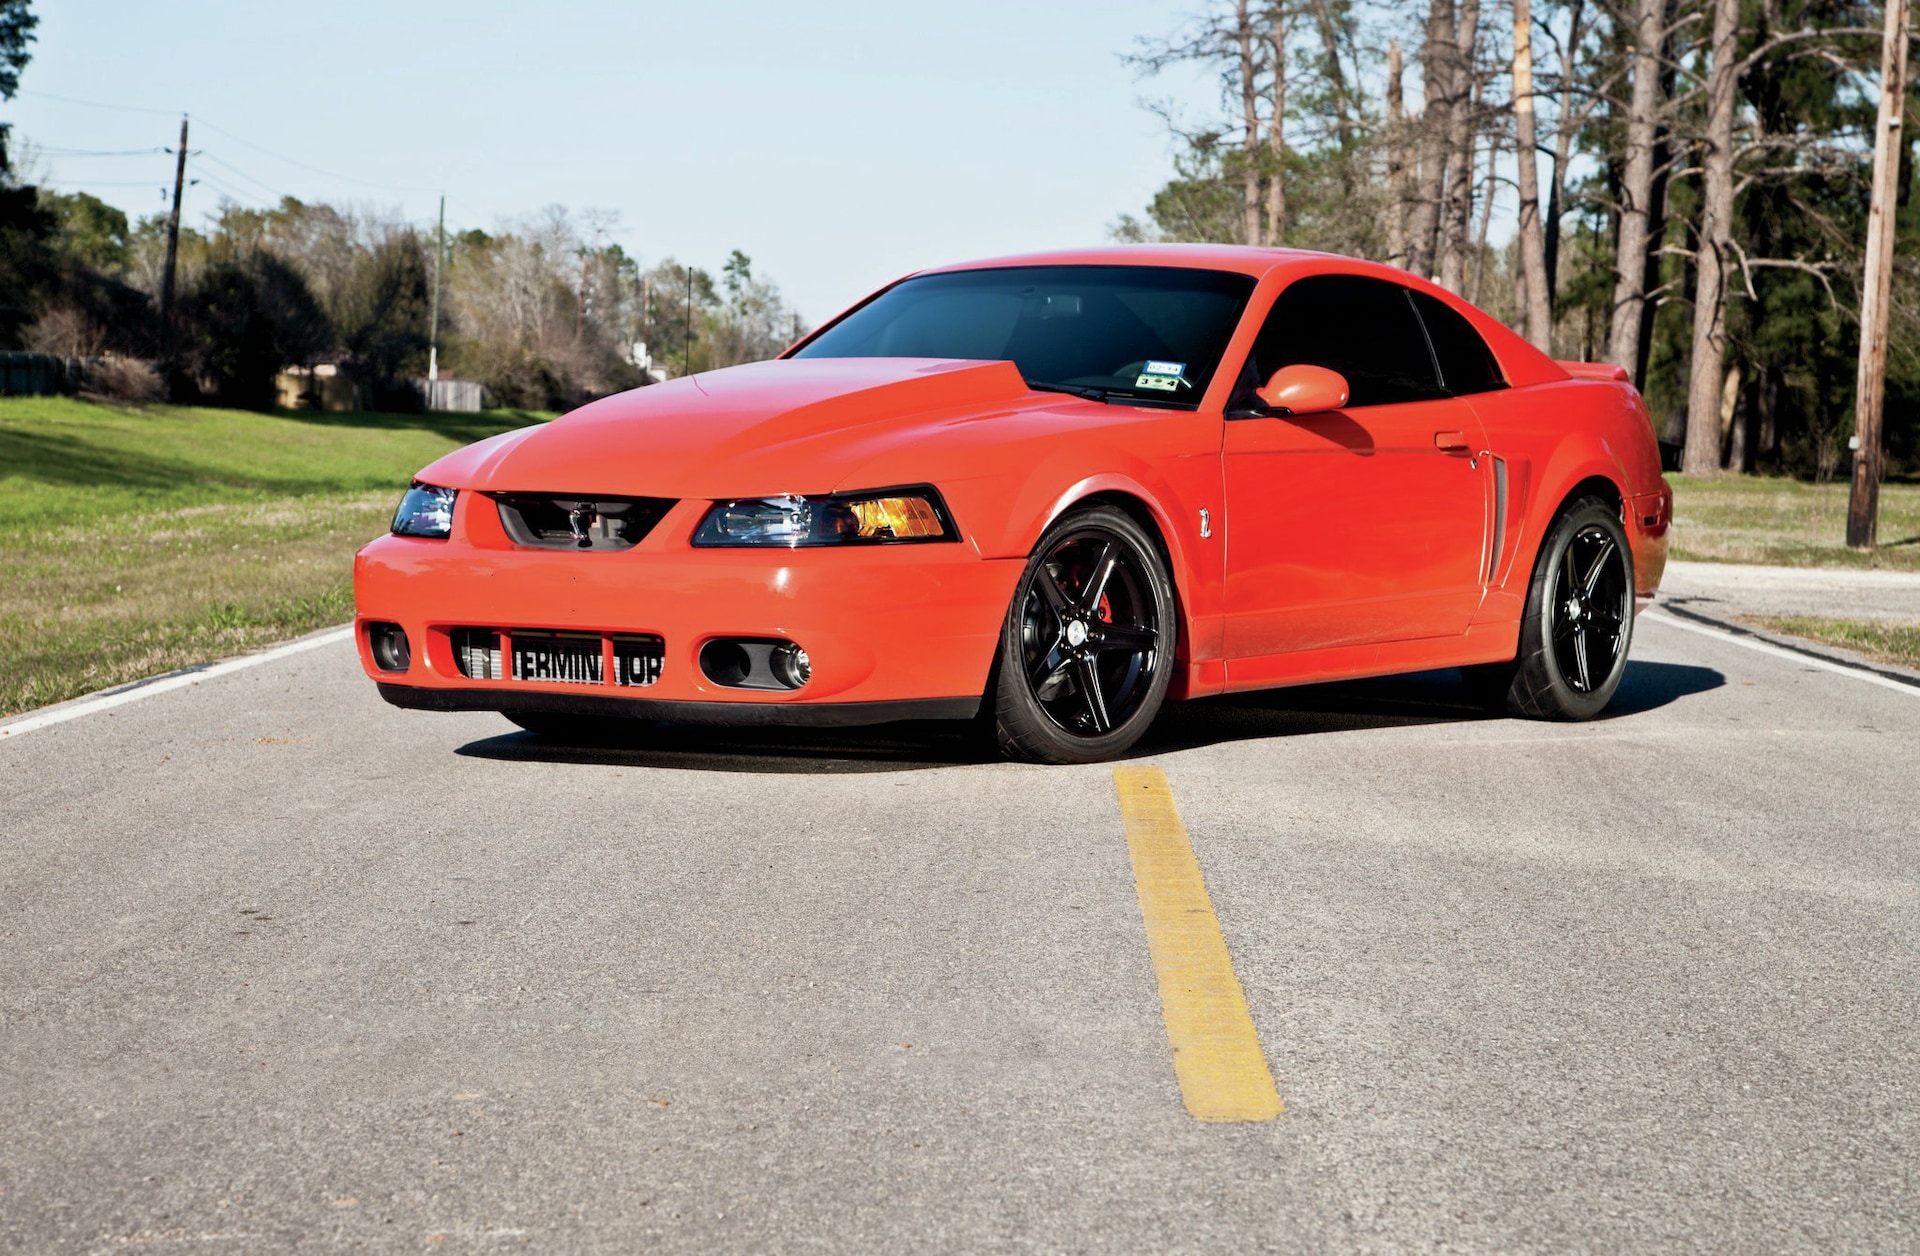 2004 Ford Mustang Cobra - The One That Got Away